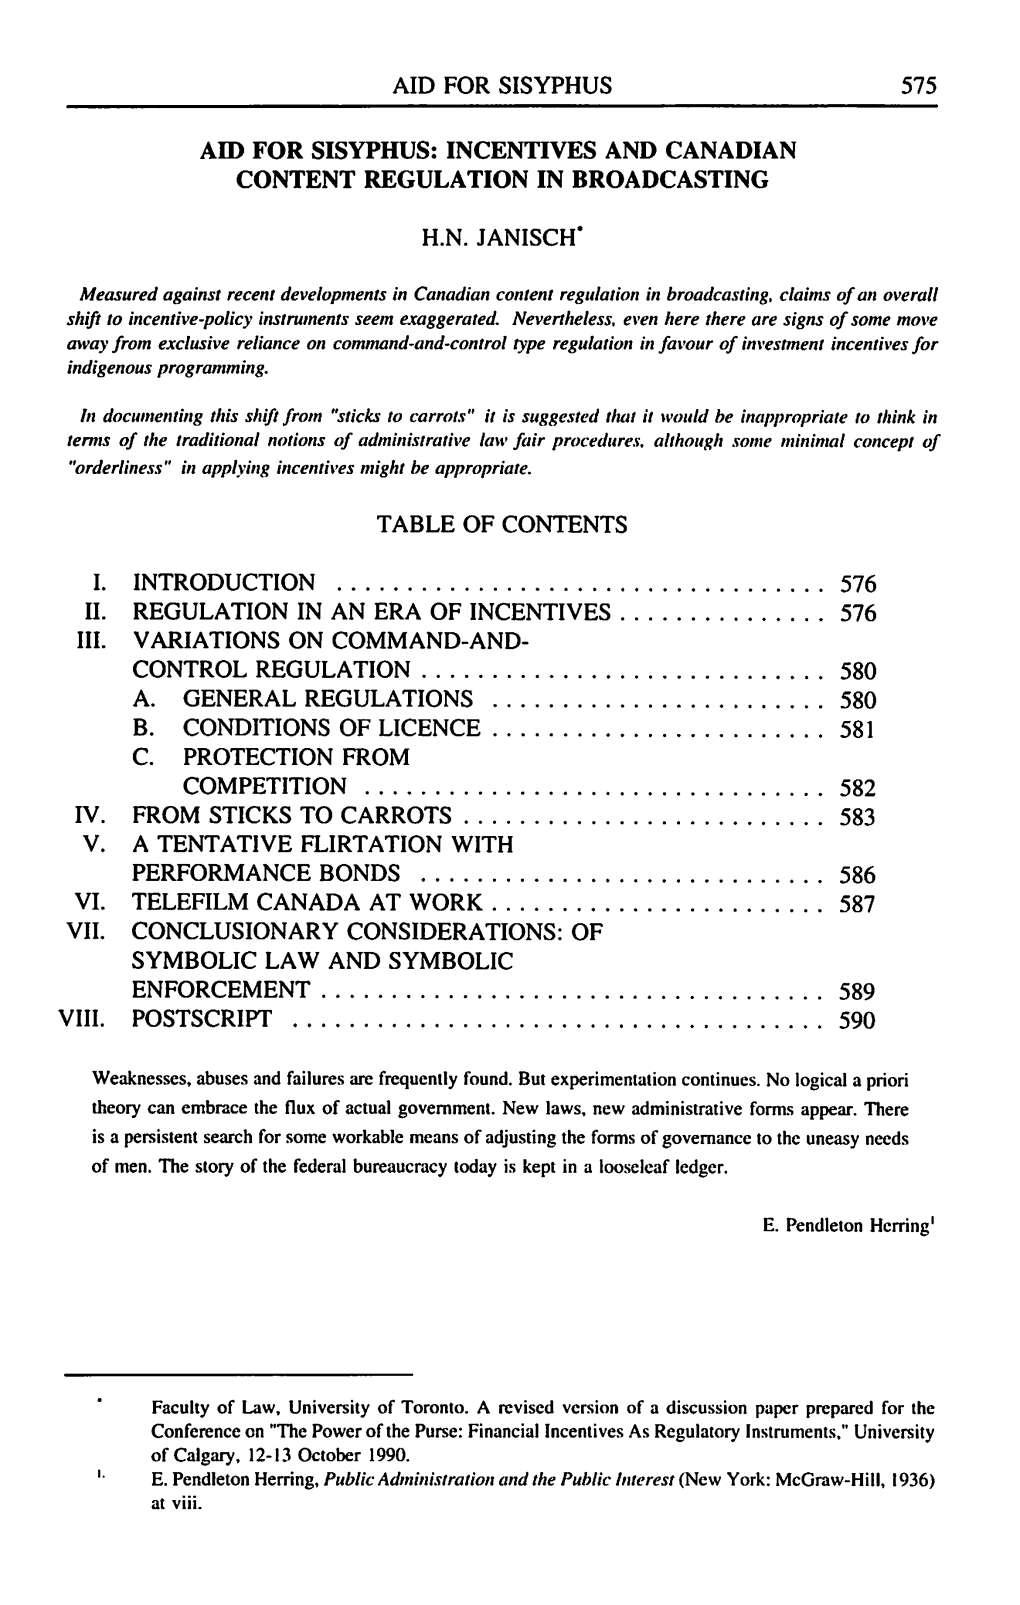 Incentives and Canadian Content Regulation in Broadcasting Hn Janisch• 575 Table of Conte